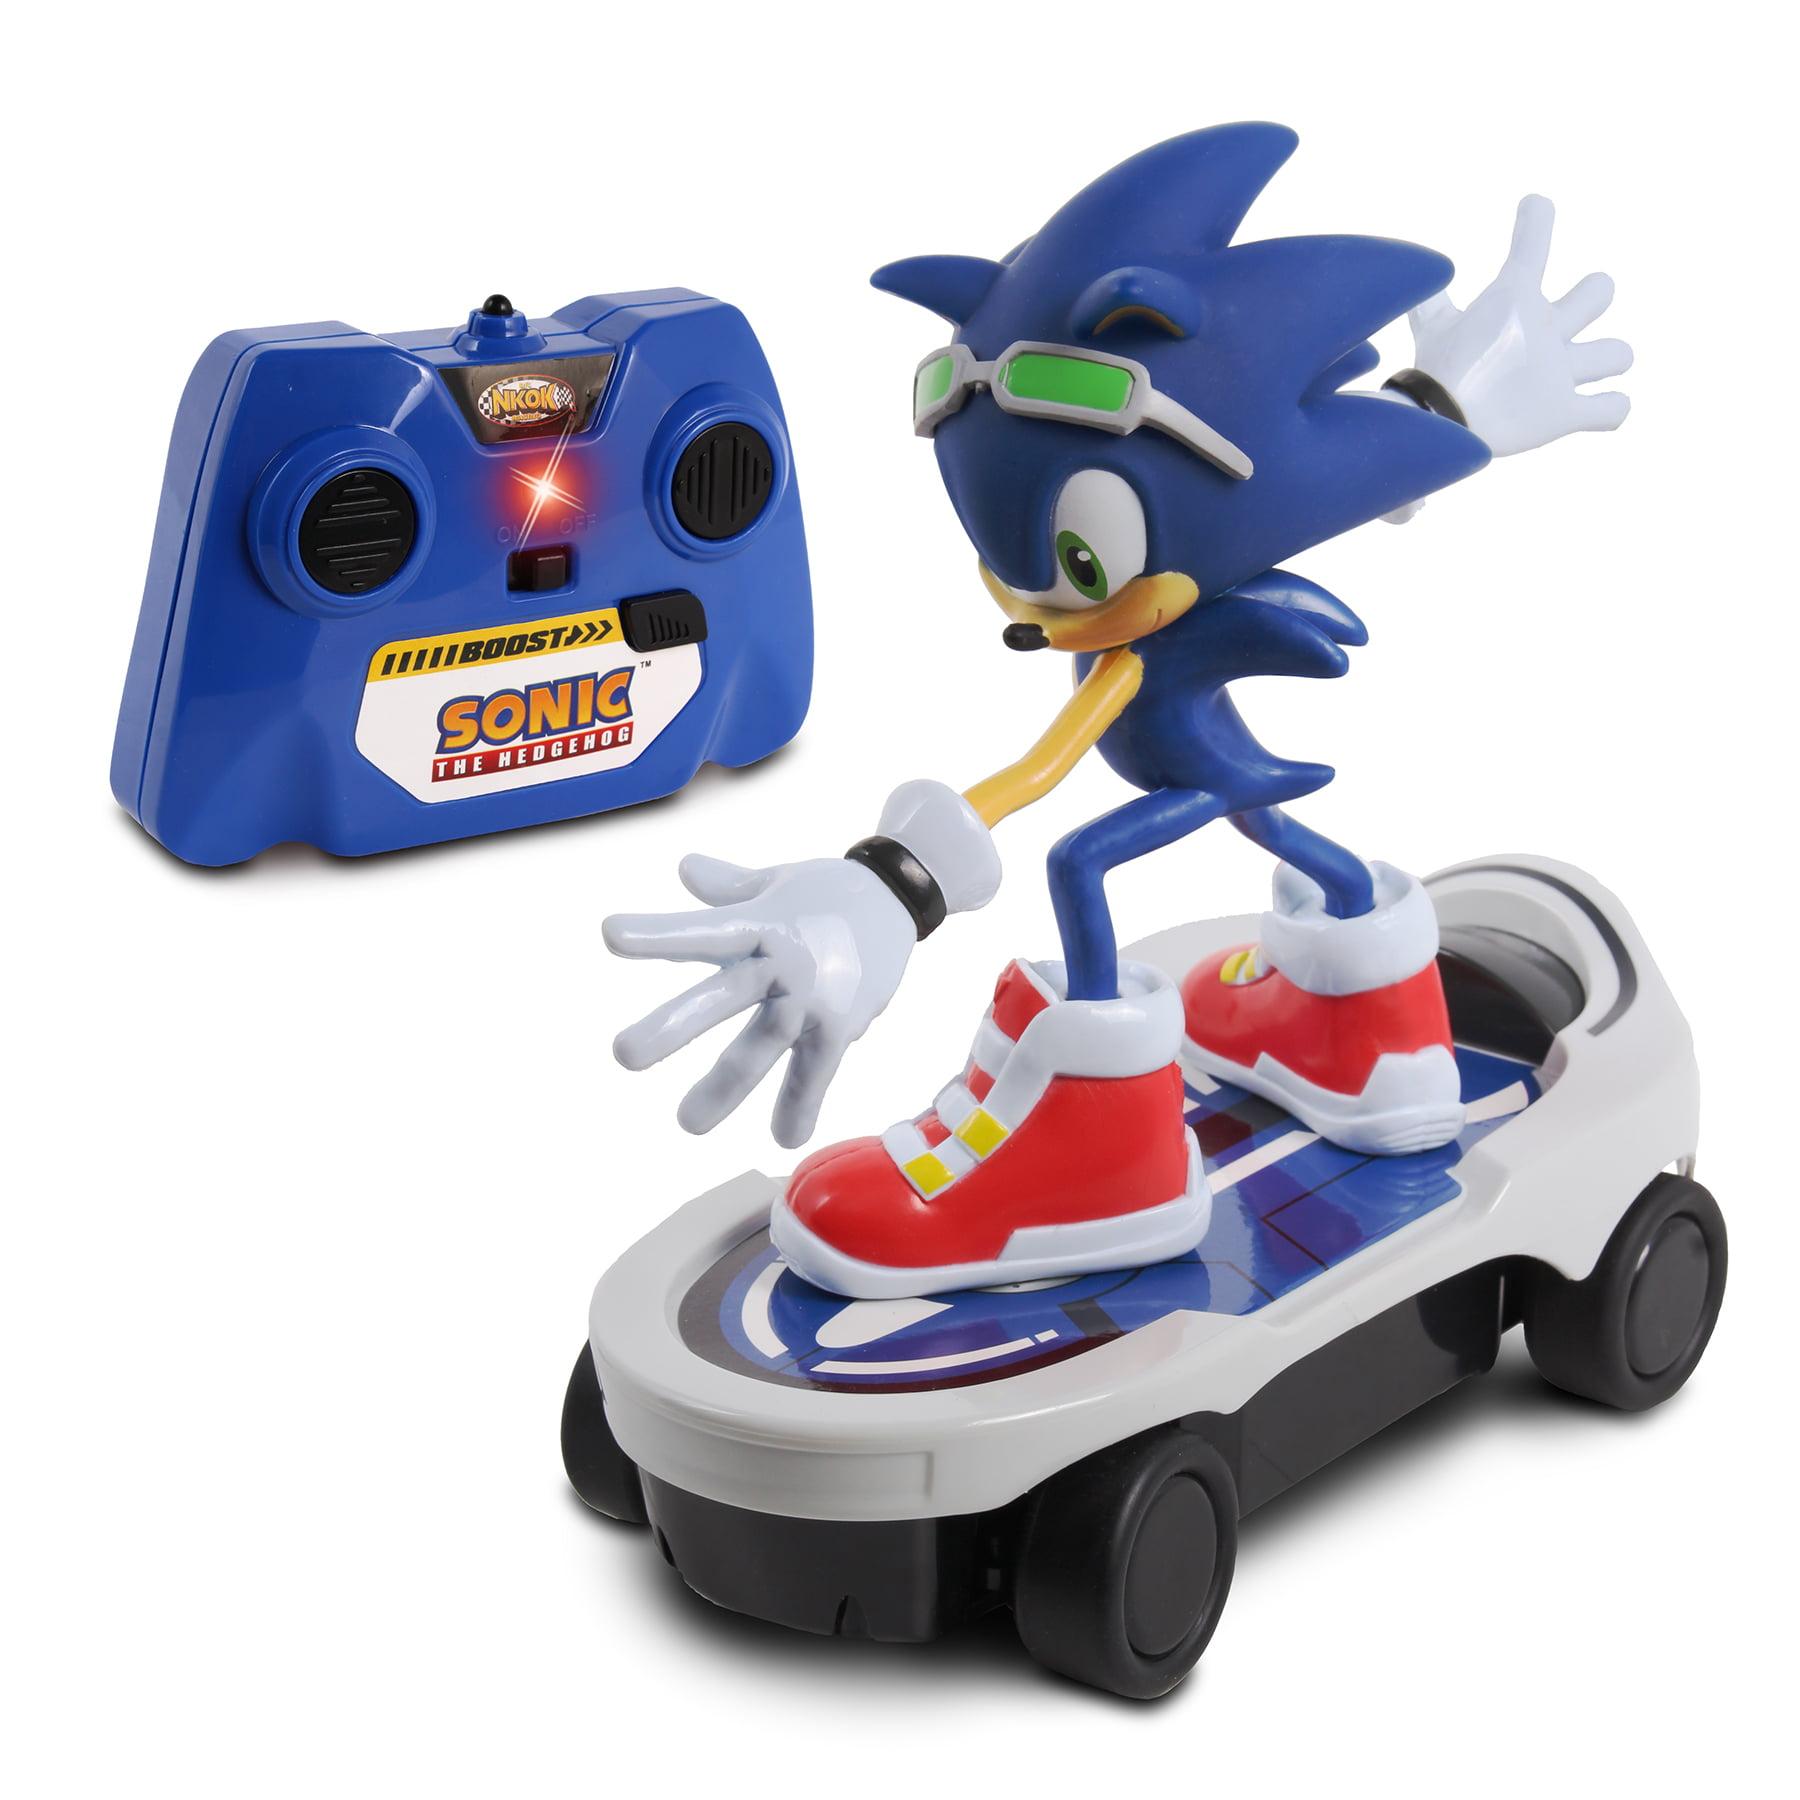 Sonic Remote Control Toys: Safety Tips for Sonic Remote Control Toys